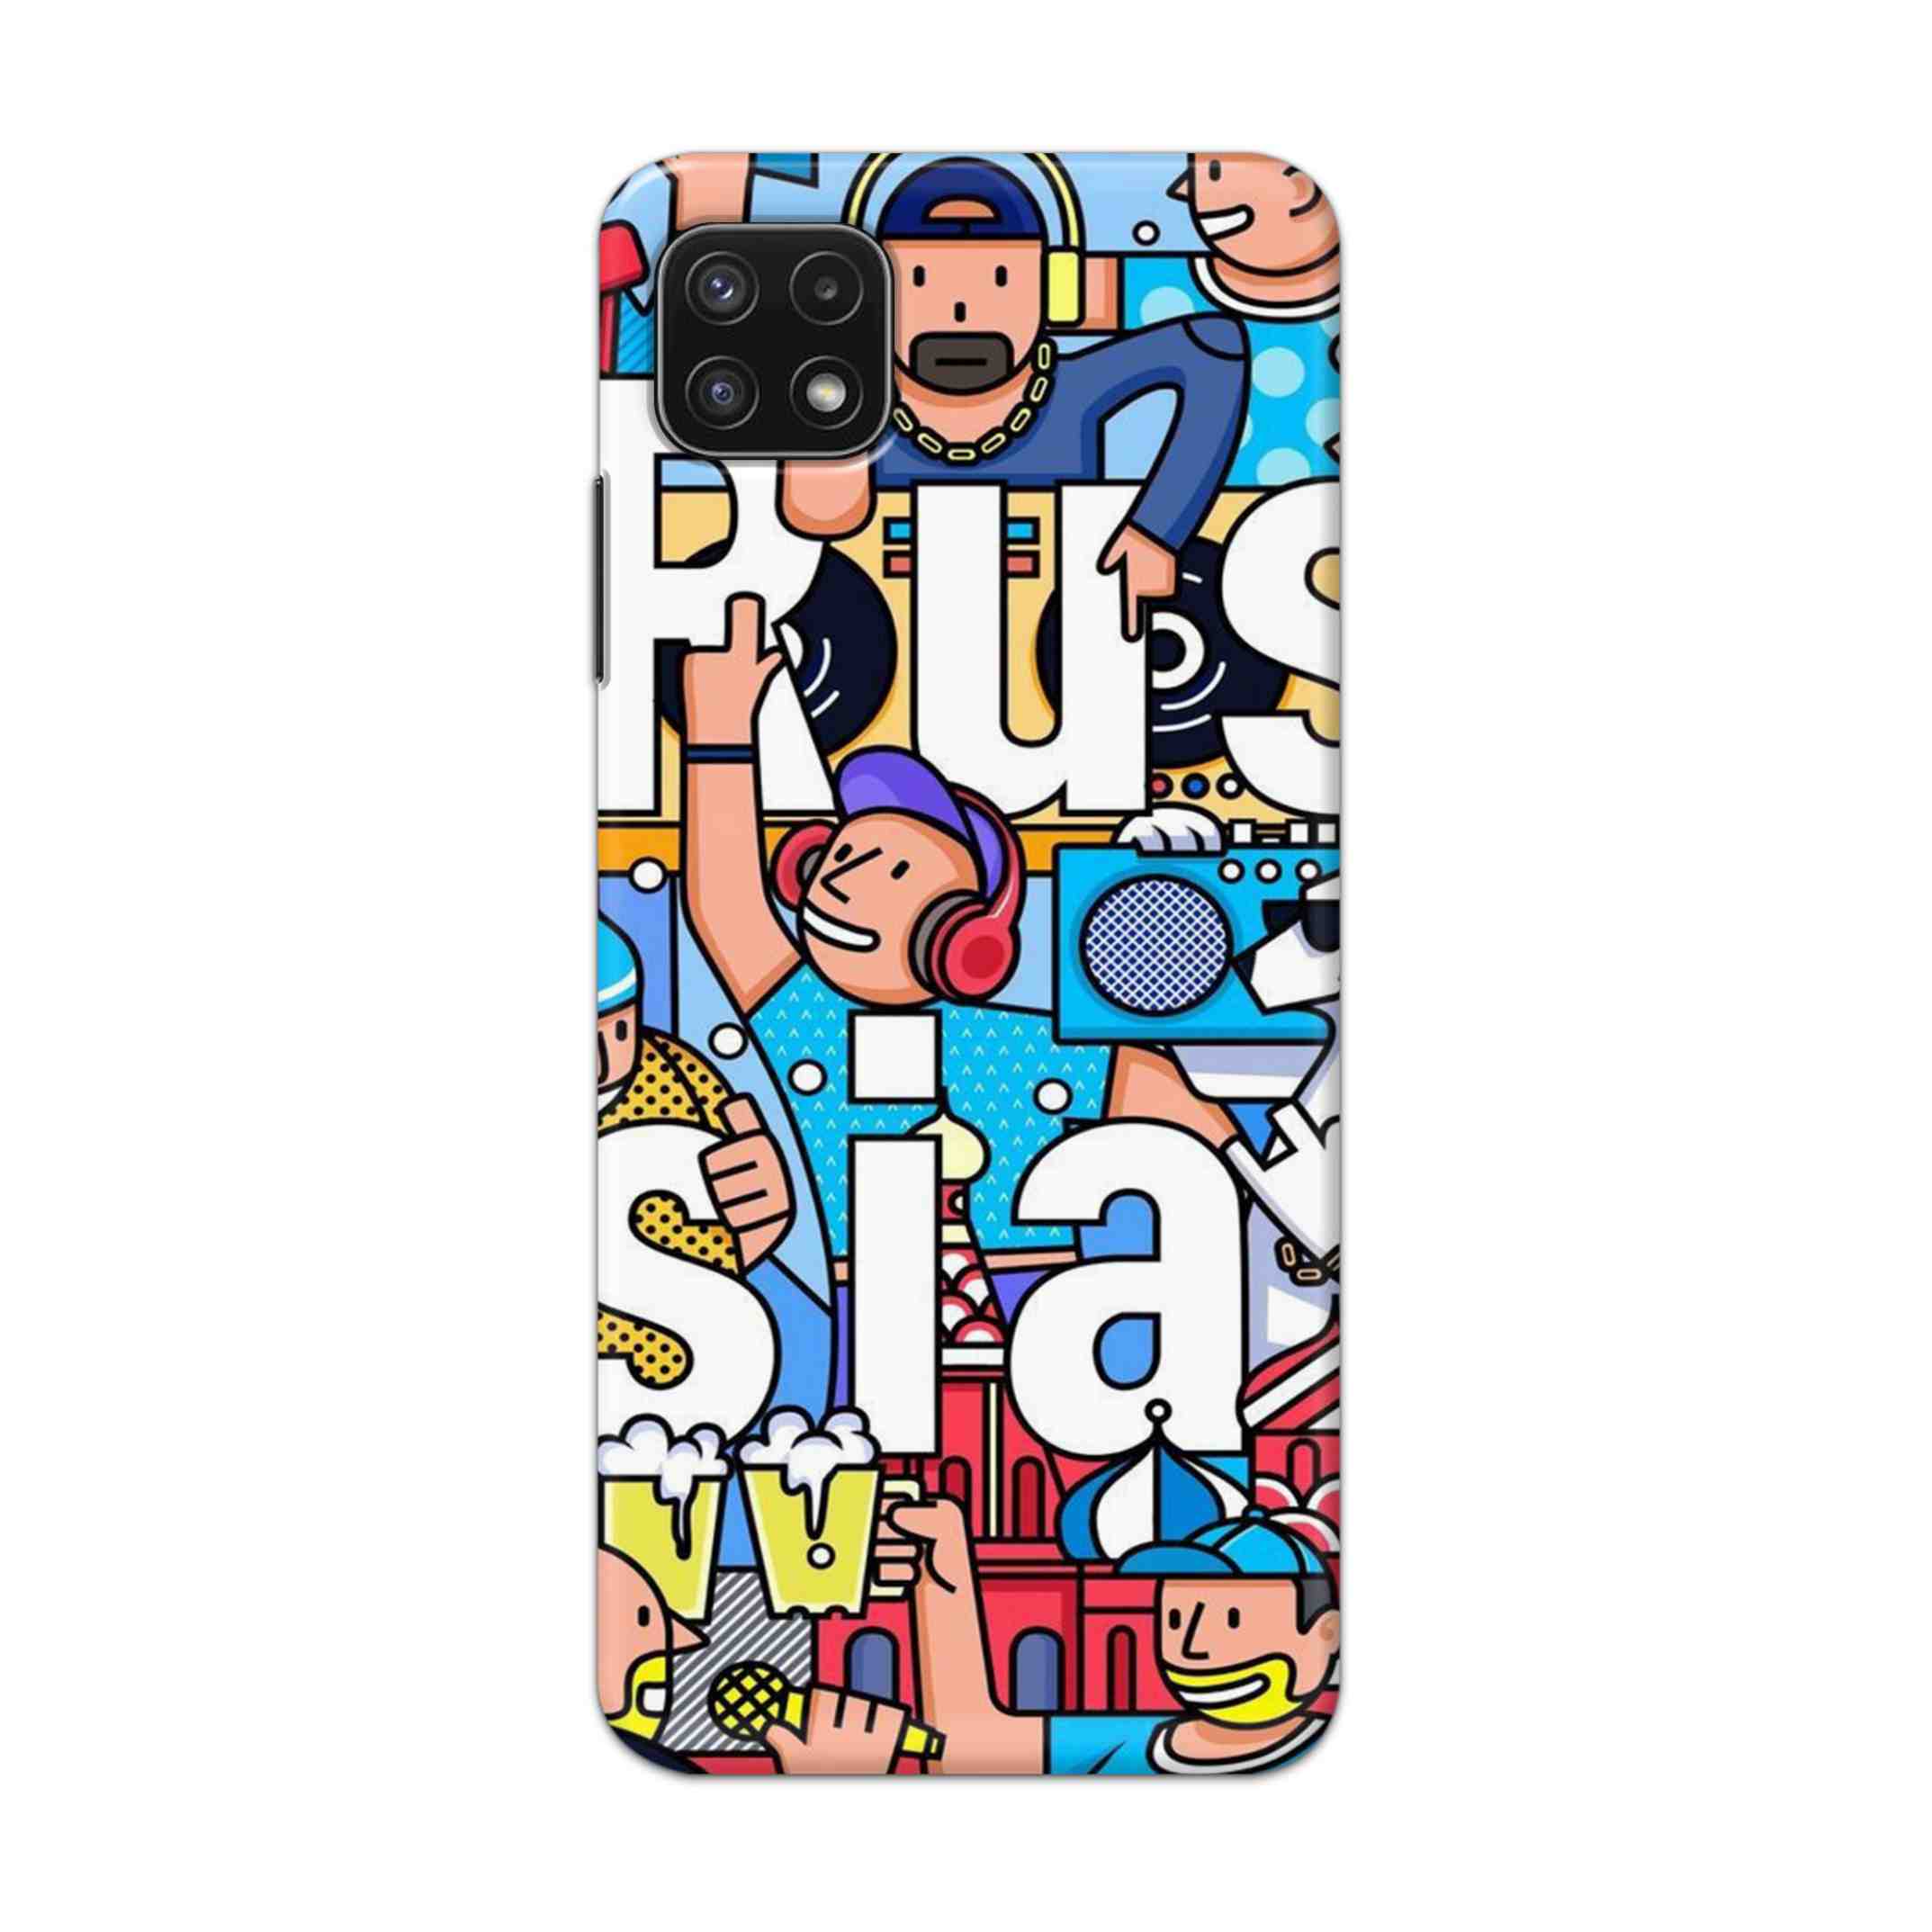 Buy Russia Hard Back Mobile Phone Case Cover For Samsung A22 5G Online